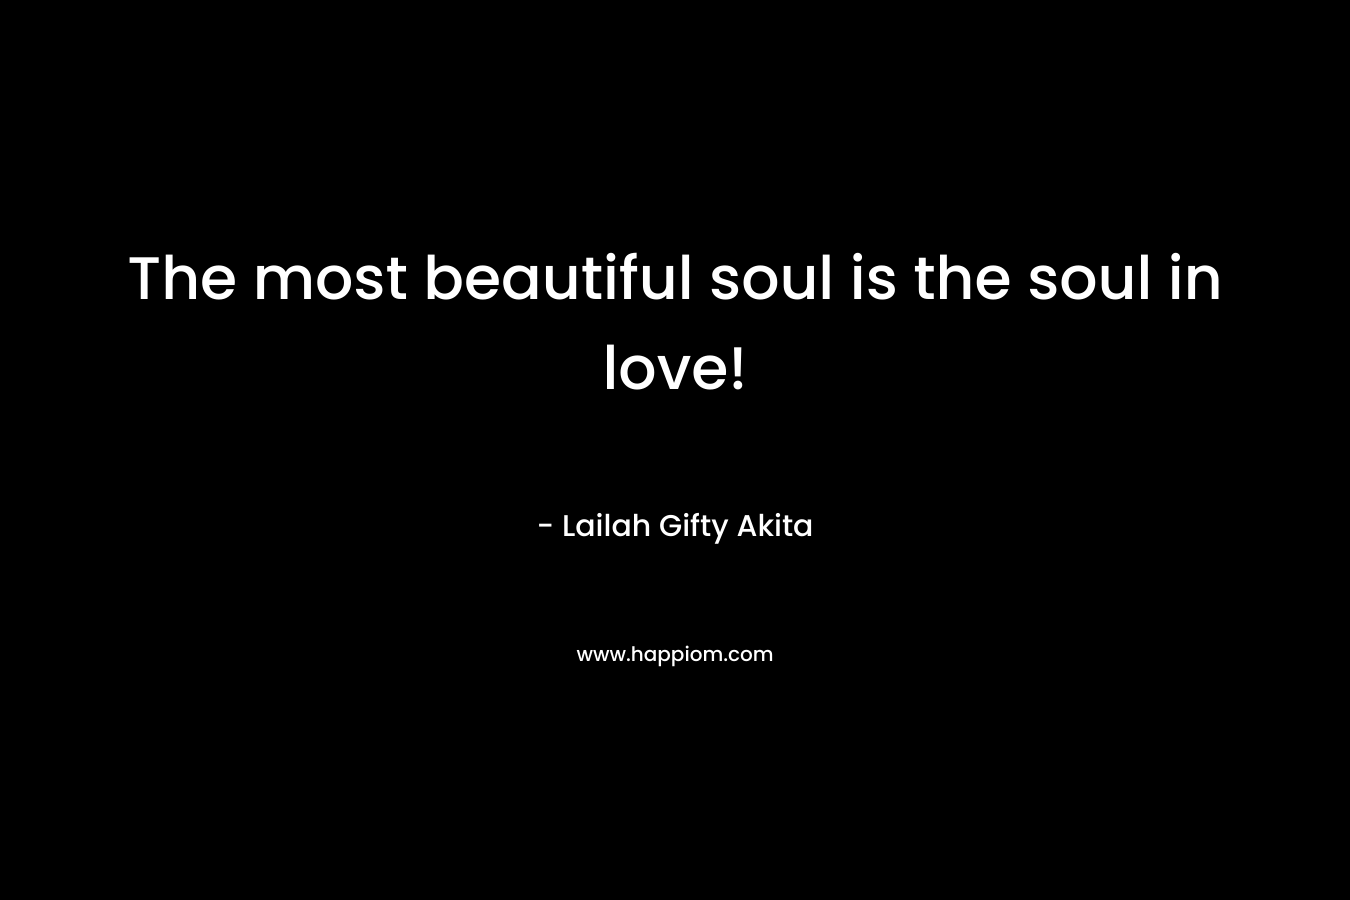 The most beautiful soul is the soul in love!